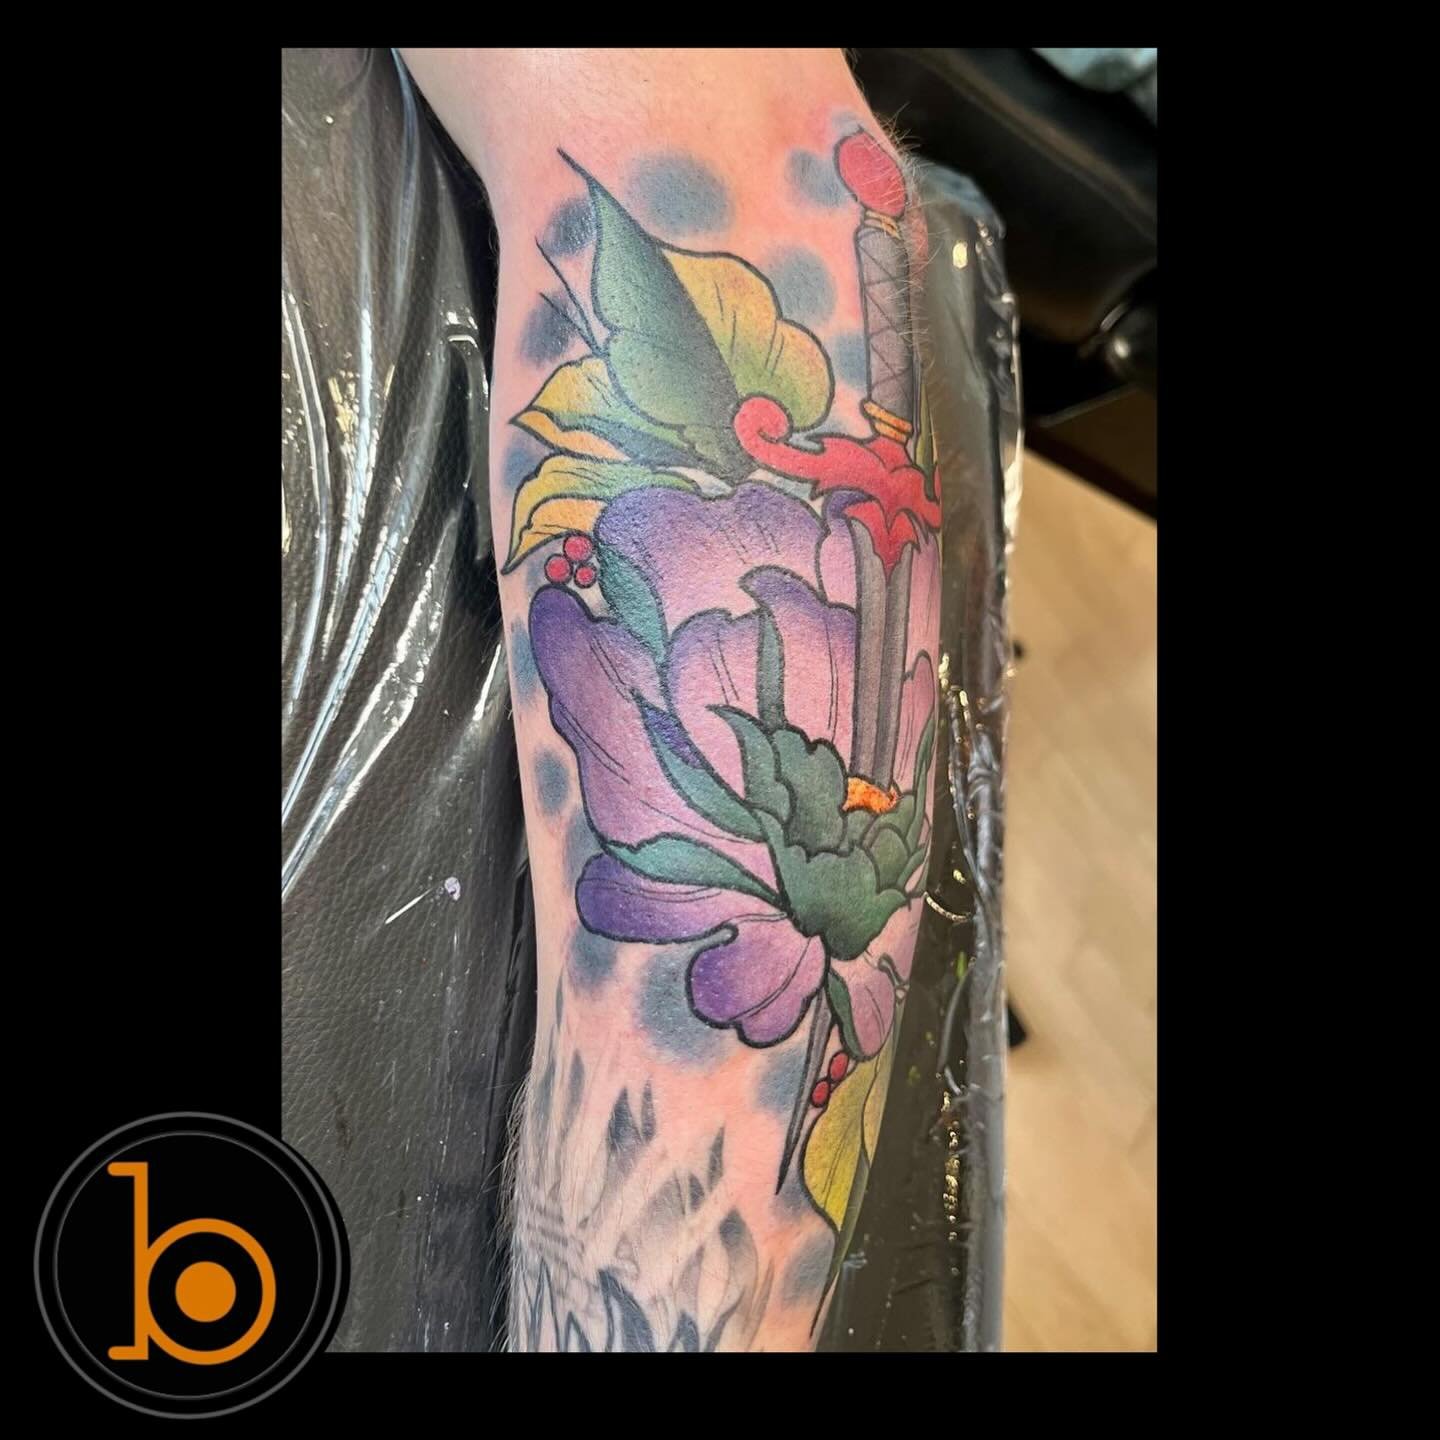 How rad is this design?! By resident artist @slotapop 🔪🌸
➖➖➖➖➖➖➖➖➖➖➖➖➖➖➖➖➖
Blueprint Gallery
138 Russell St
 Hadley MA 01035
📱(413)-387-0221 
WALK-INS WELCOME 
🕸️ www.blueprintgallery.com 🕸️
⬇️⬇️⬇️⬇️⬇️⬇️⬇️⬇️⬇️⬇️⬇️⬇️⬇️
Made using materials from:
